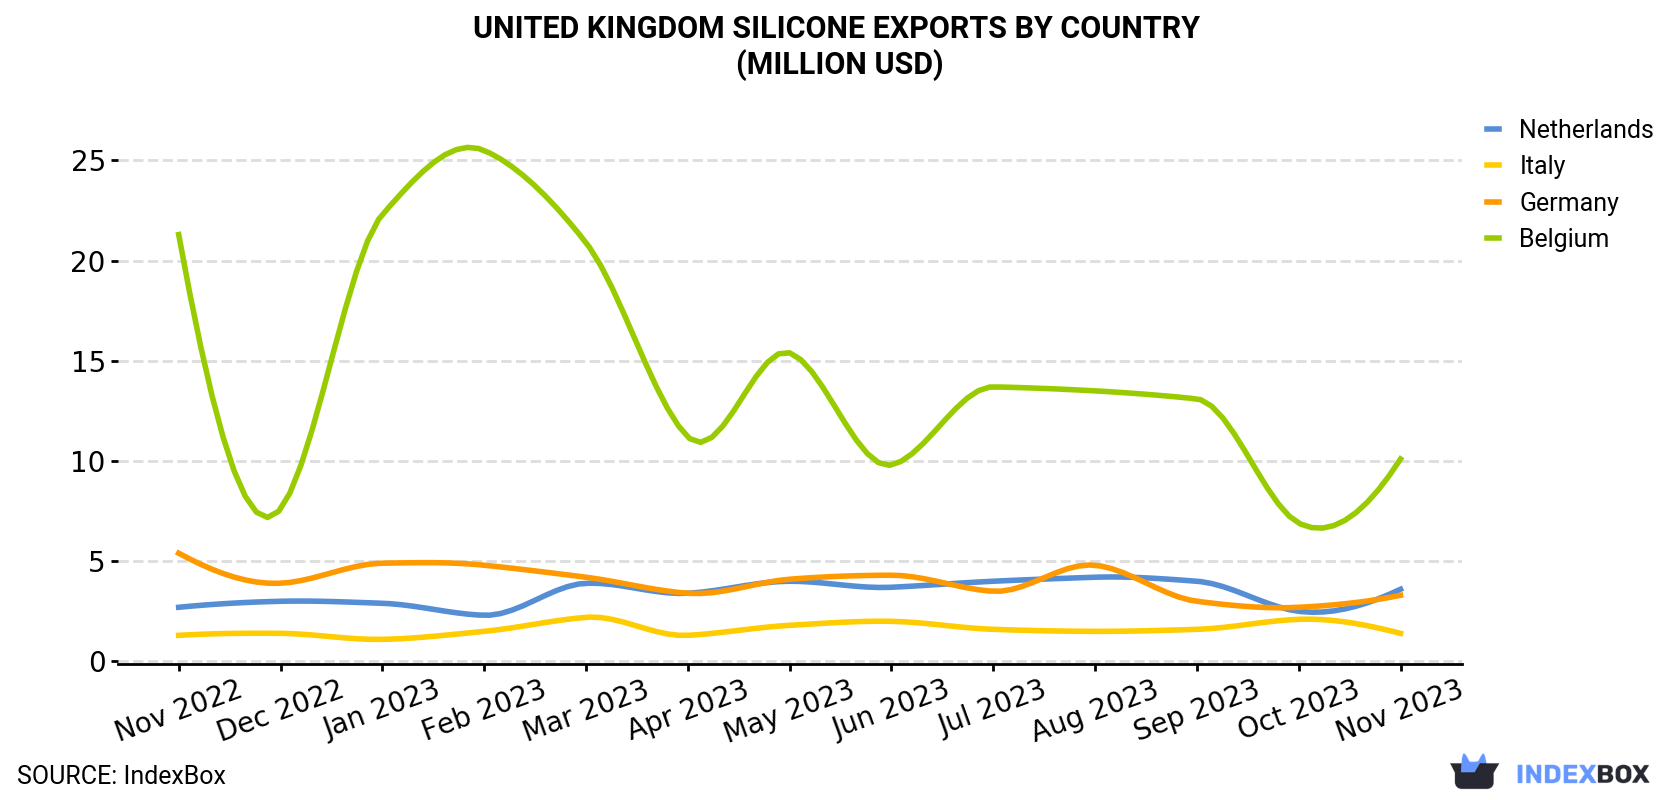 United Kingdom Silicone Exports By Country (Million USD)